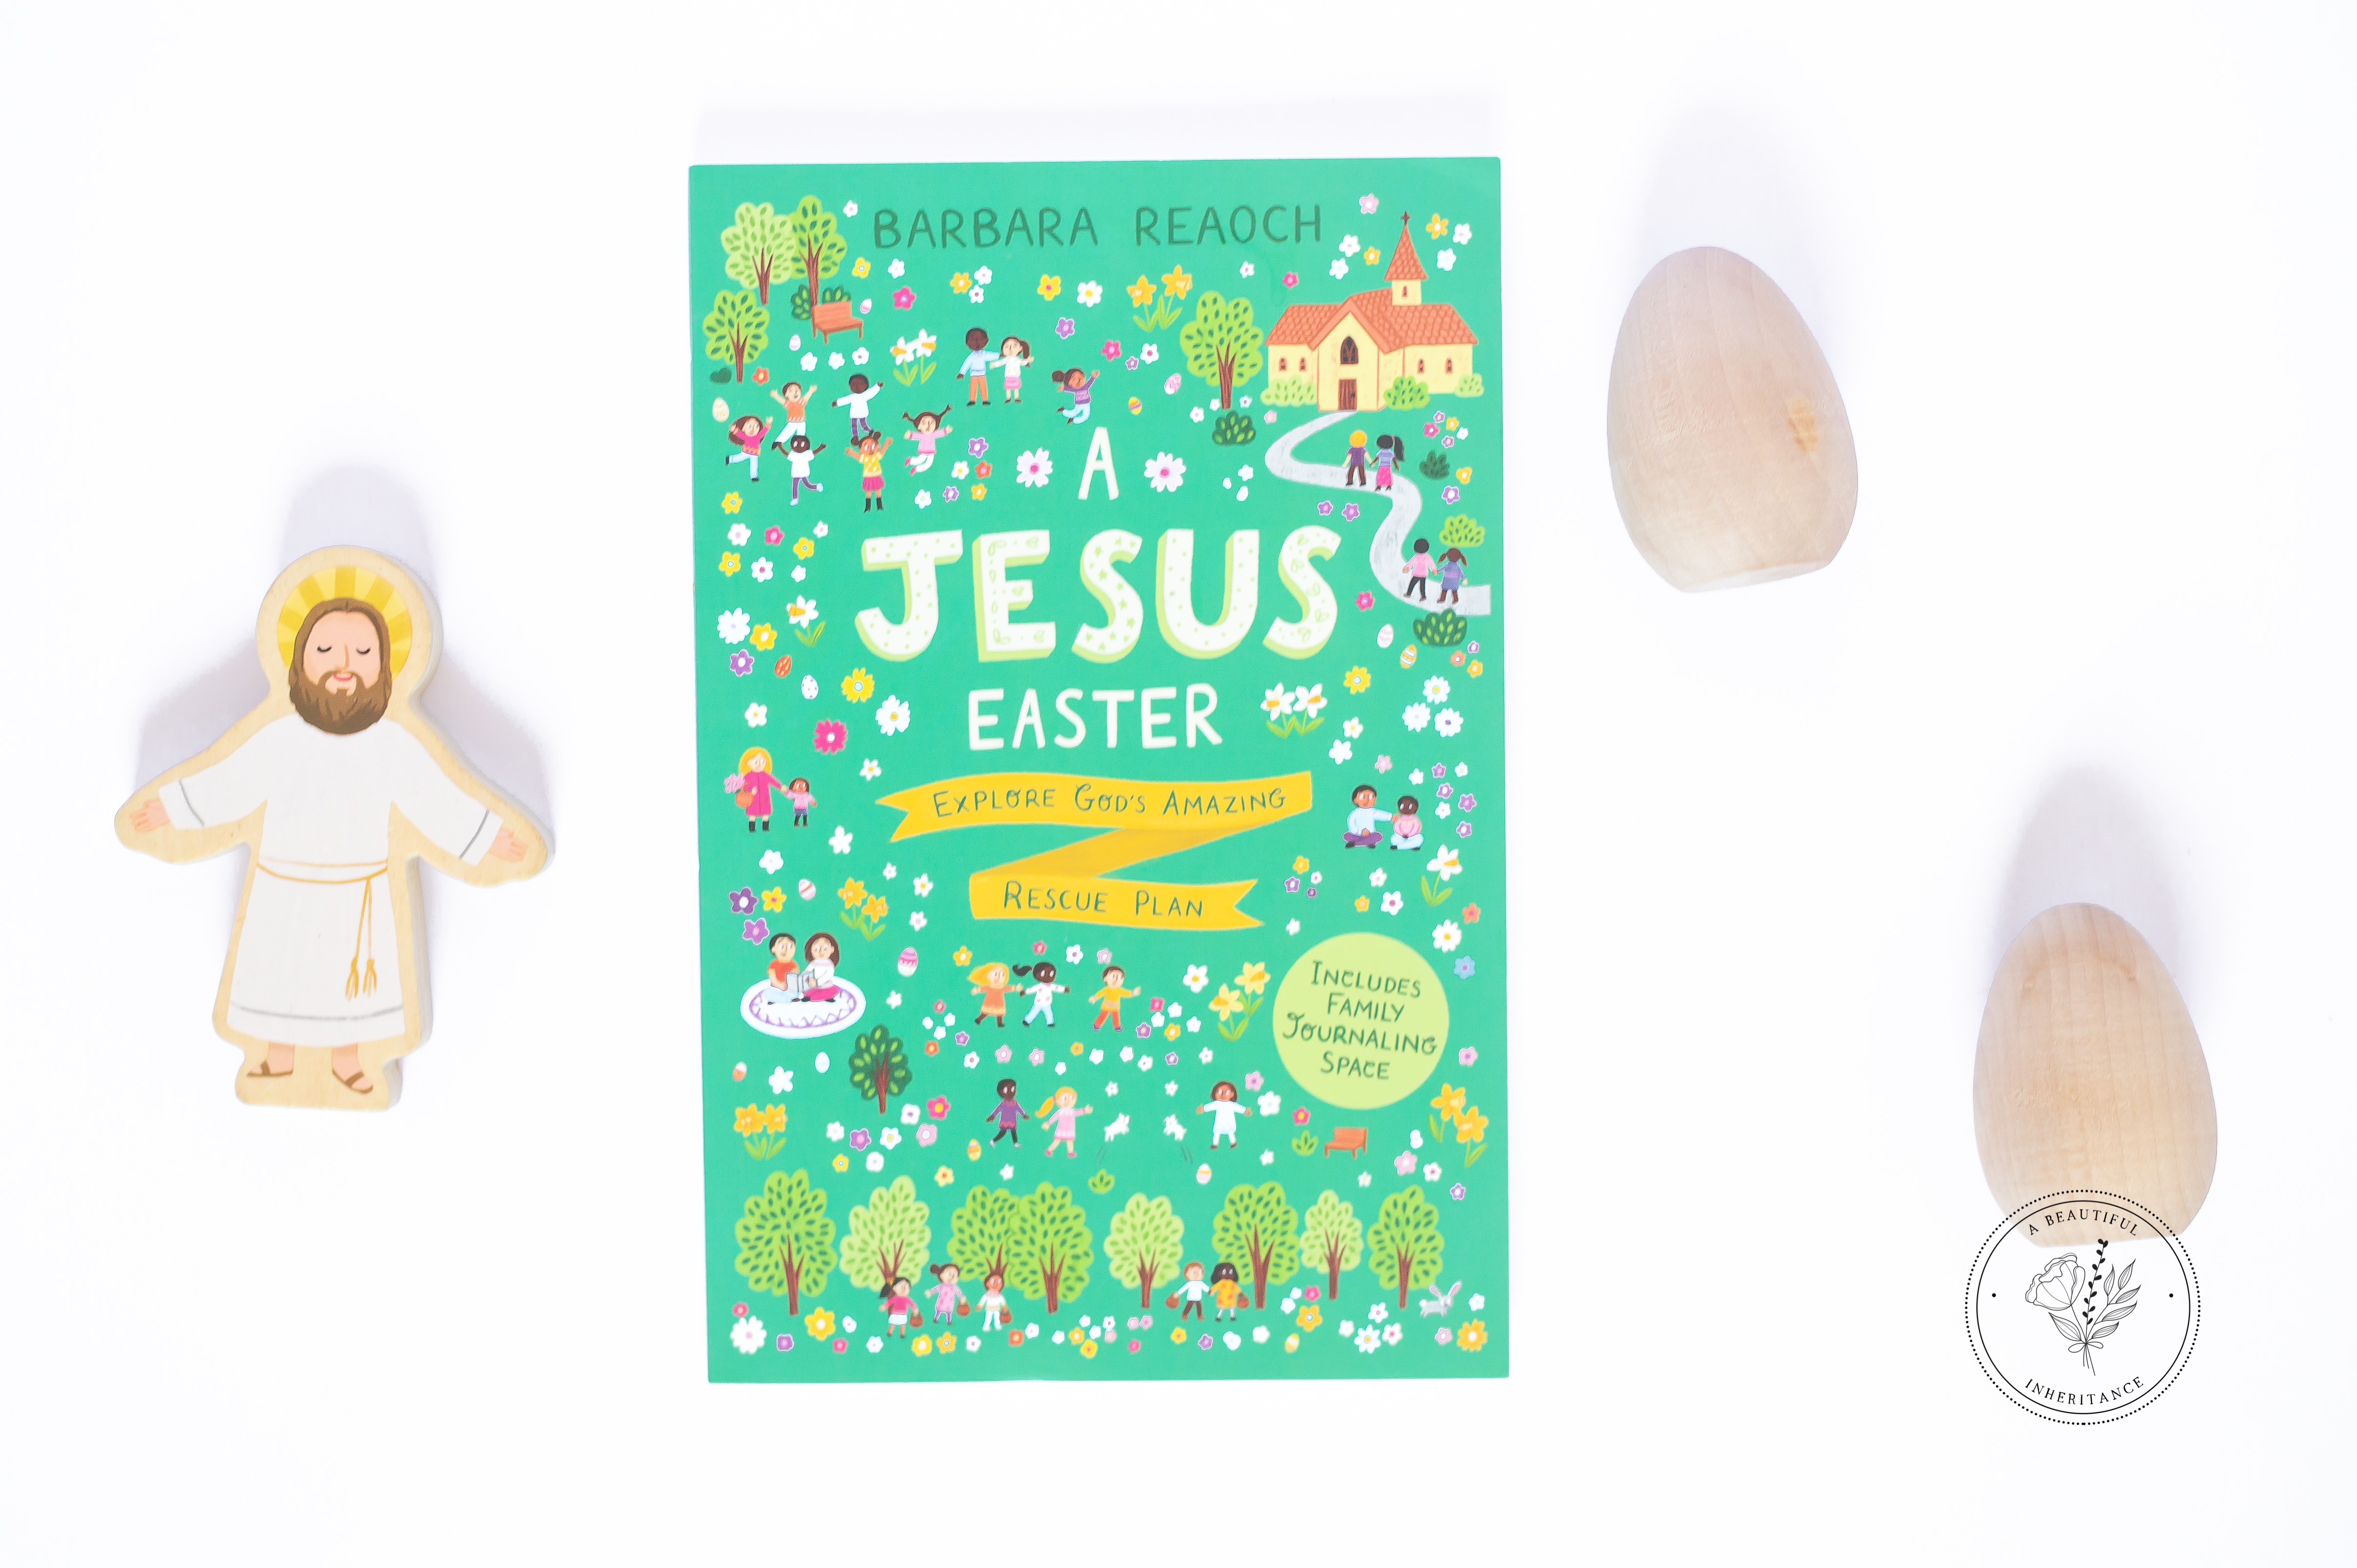 A Jesus Easter